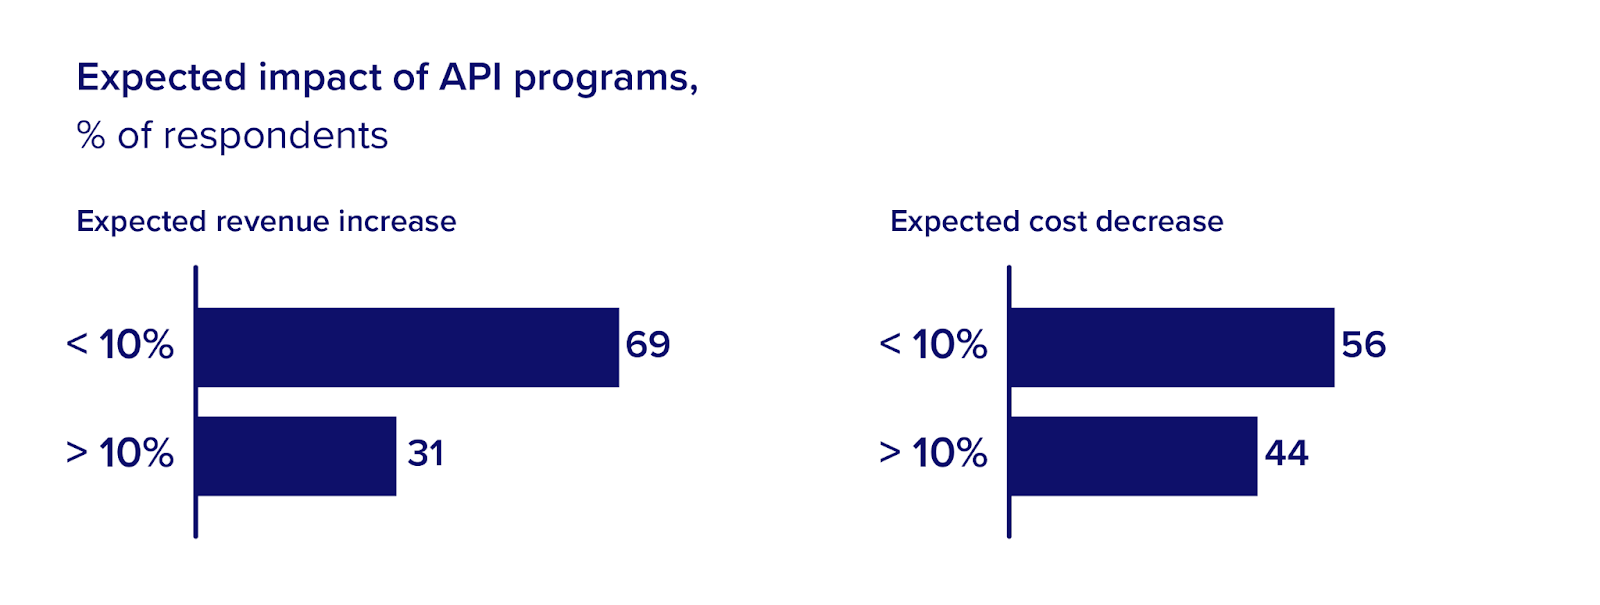 Expectations for the impact of API programs on revenue and cost